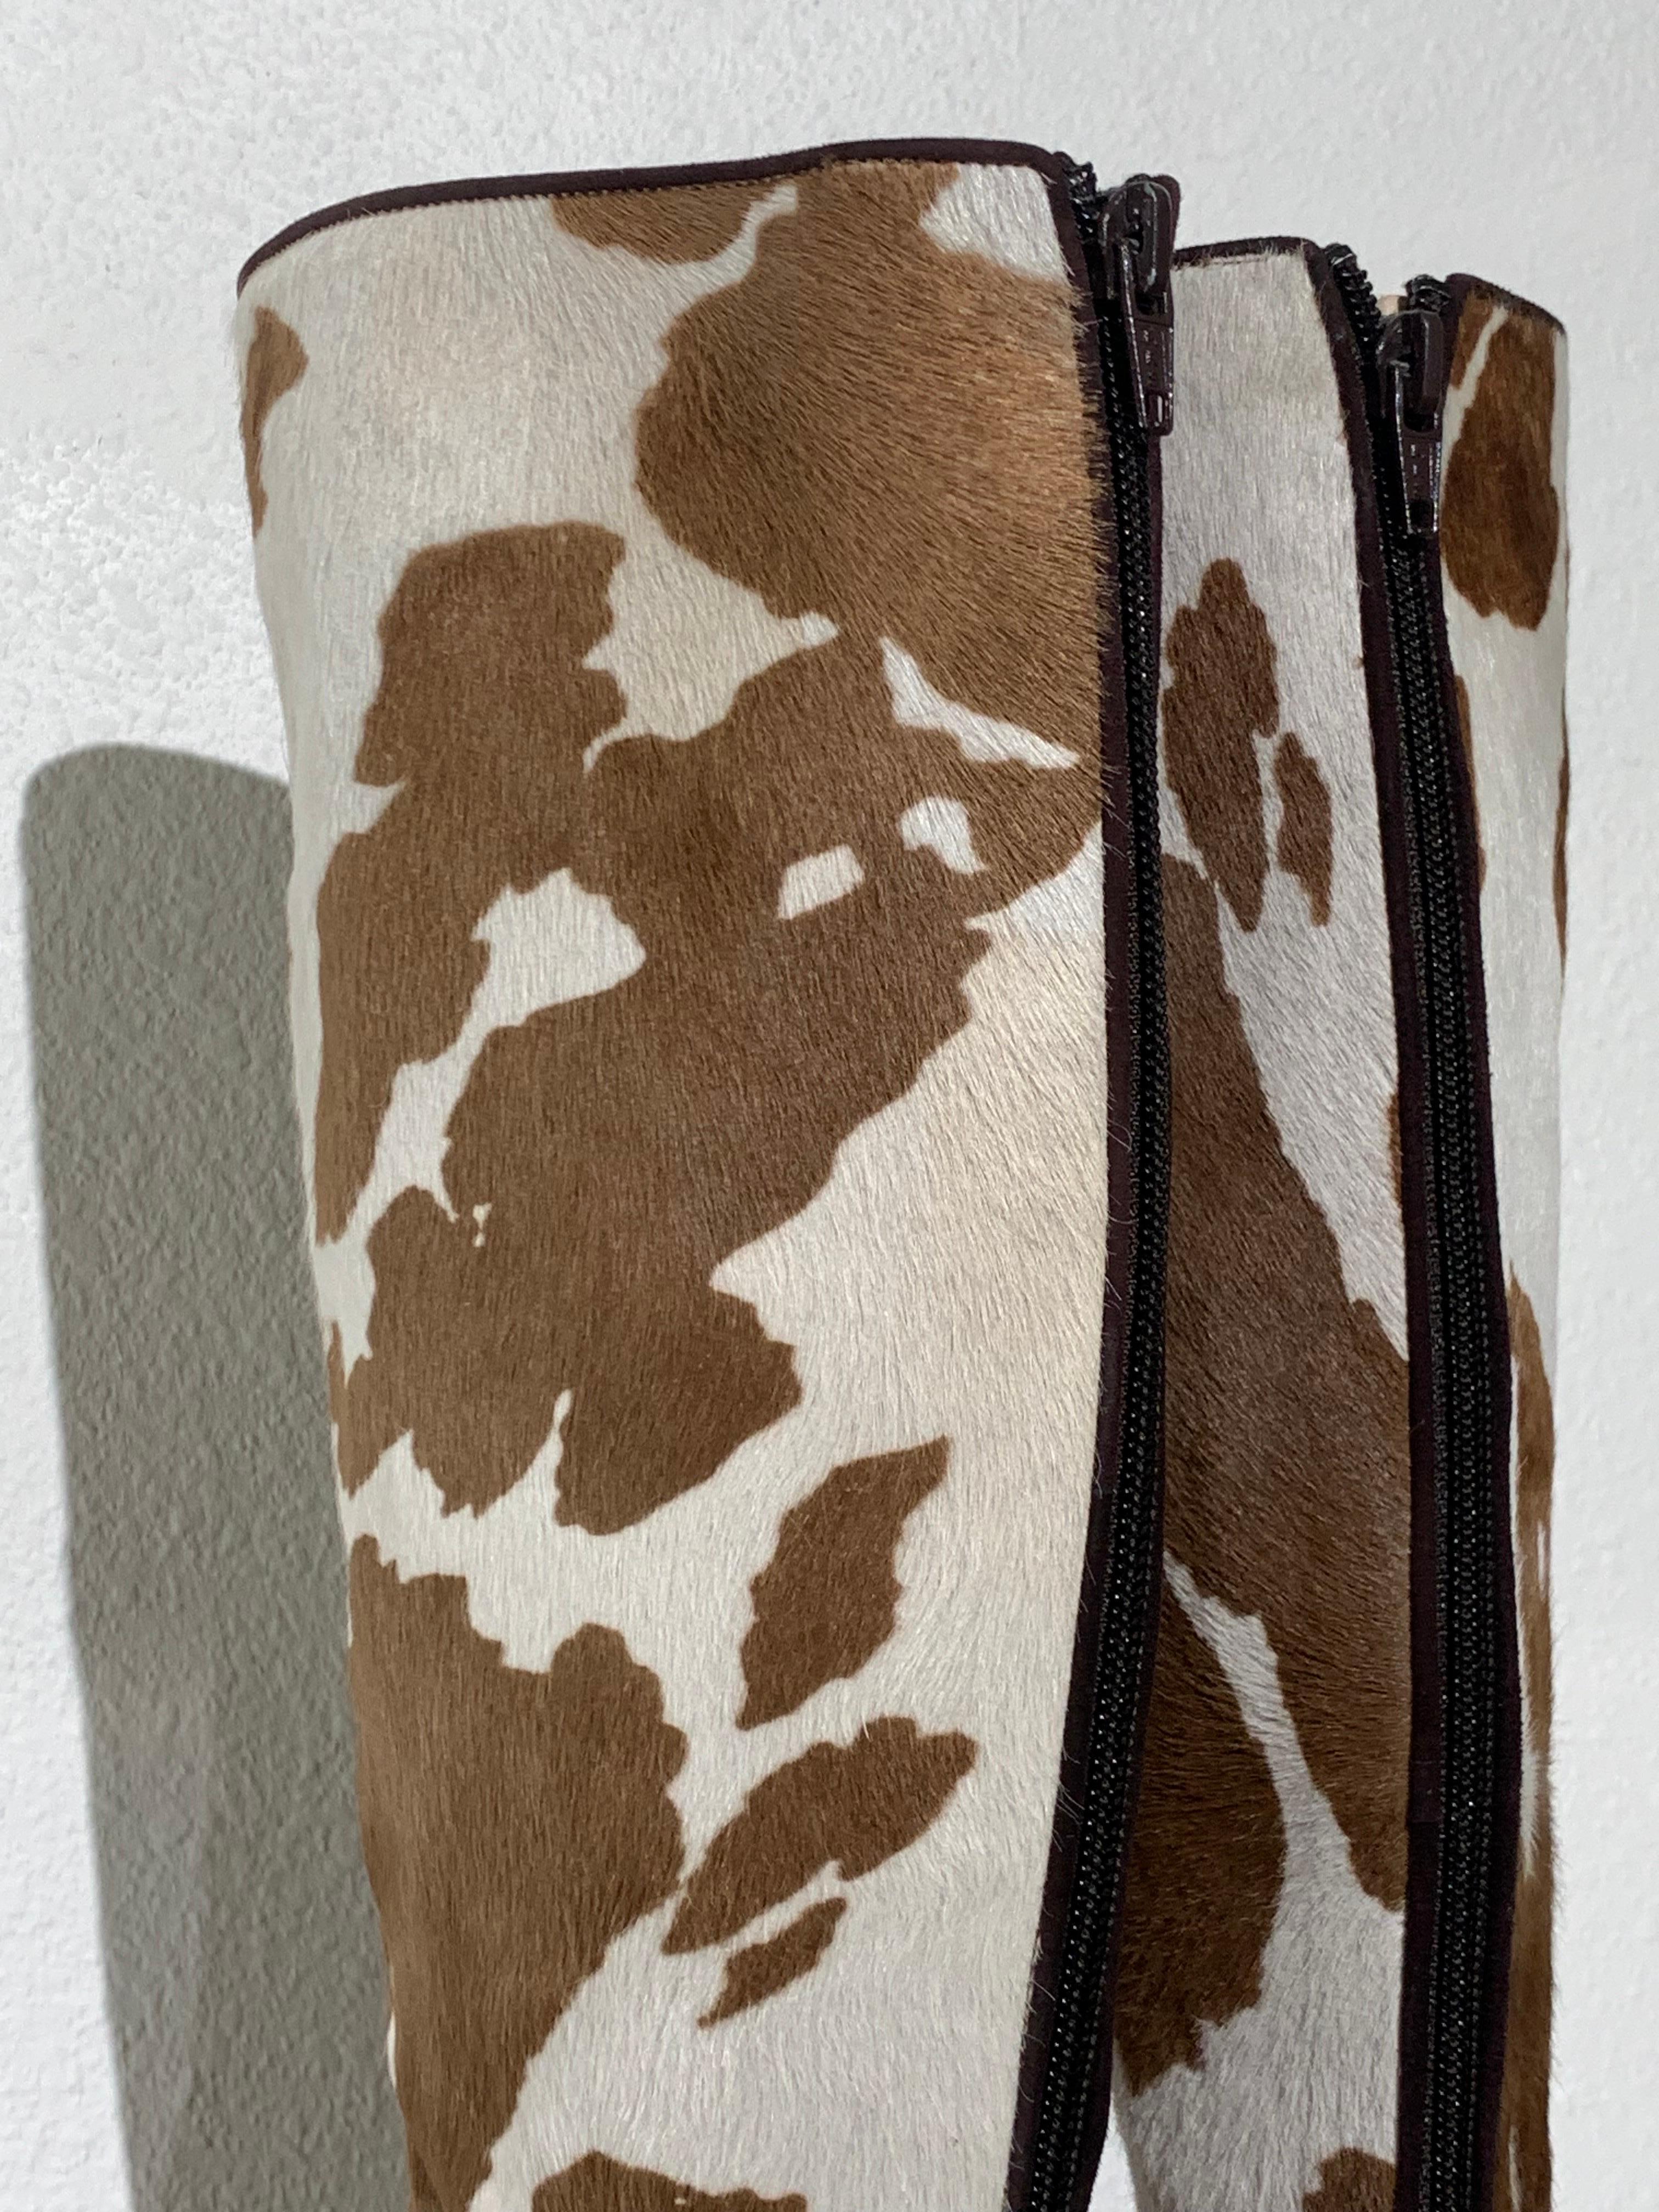 Manolo Blahnik Brown & White Cow Print Leather Knee-High Stiletto Heel Boots For Sale 2